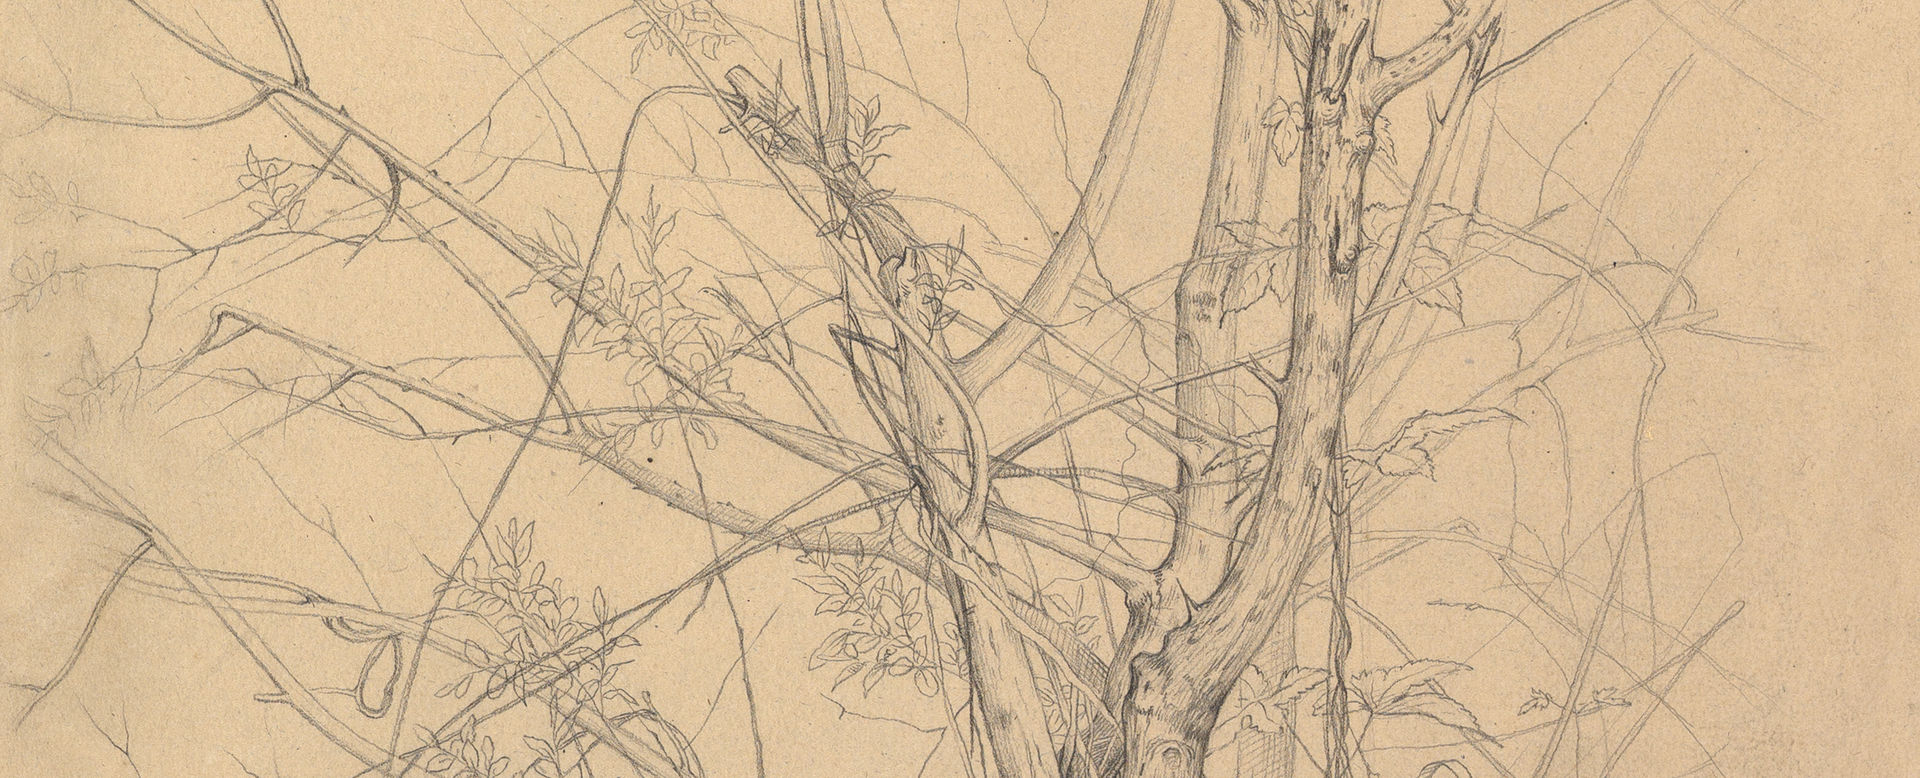 beautiful pencil sketches of trees